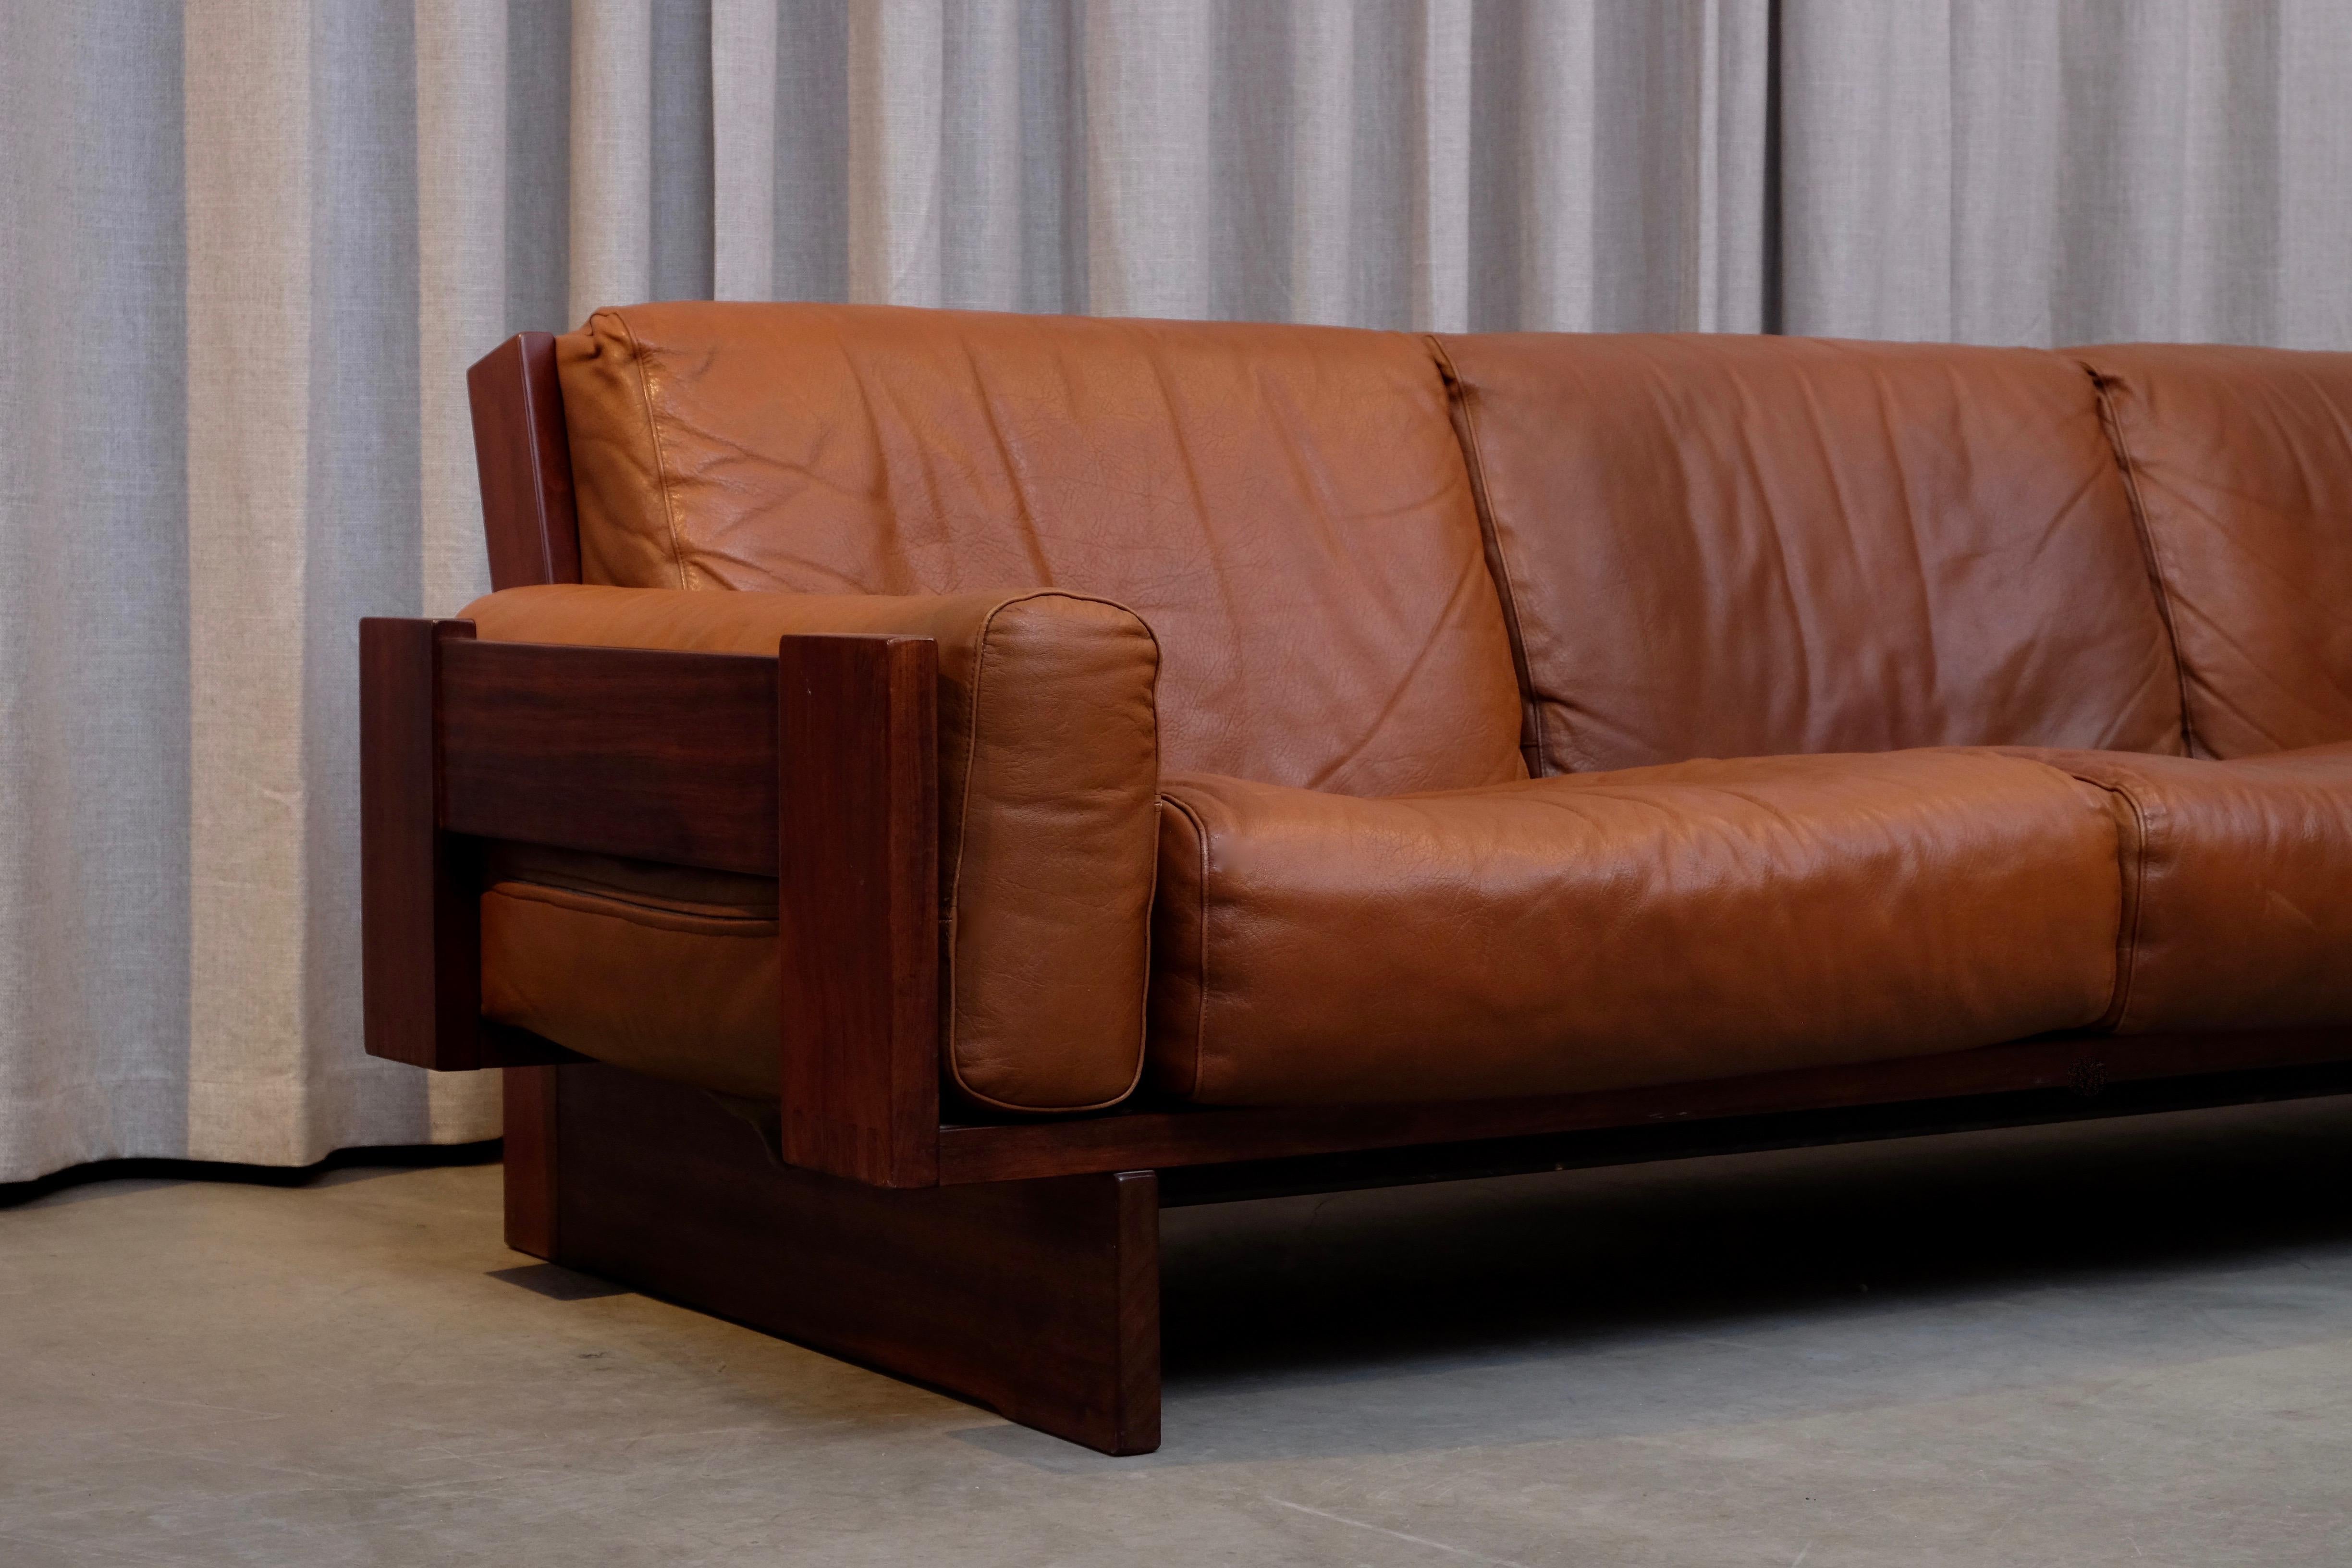 - 3-seat, 230 cm (Please note: a single 2-seat is also available, see picture (163 cm)
- Afromosia and original cognac brown leather with perfect patina
- Designed 1967
- Produced by Stranda industri / Bruksbo in Norway, 1960s.
 